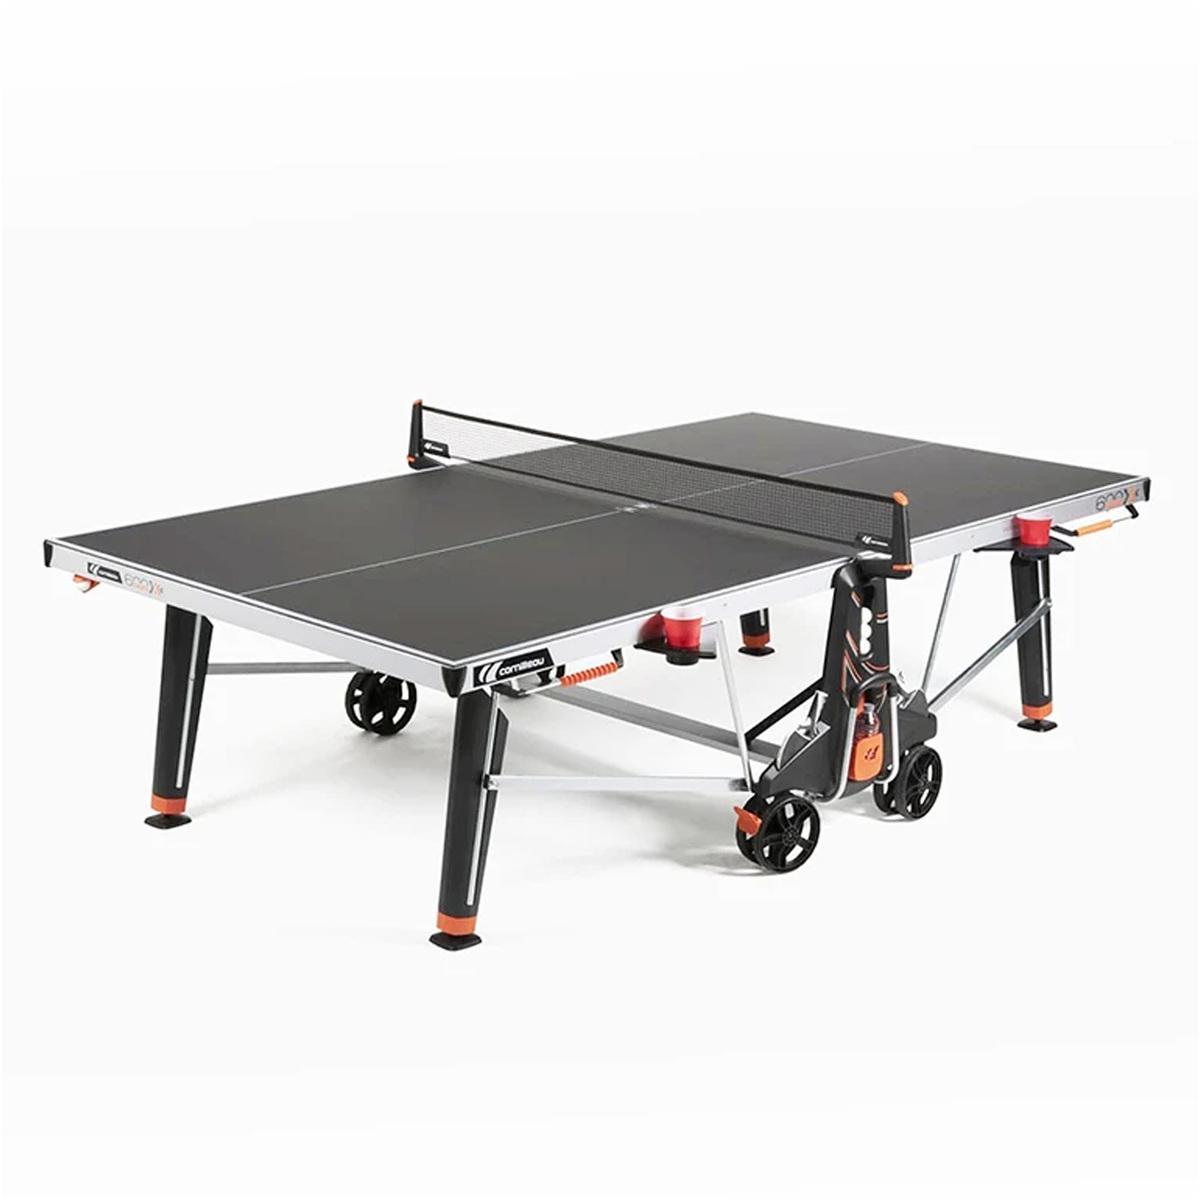 Cornilleau 600 X Performance Outdoor Table Tennis Table, Black, 34016